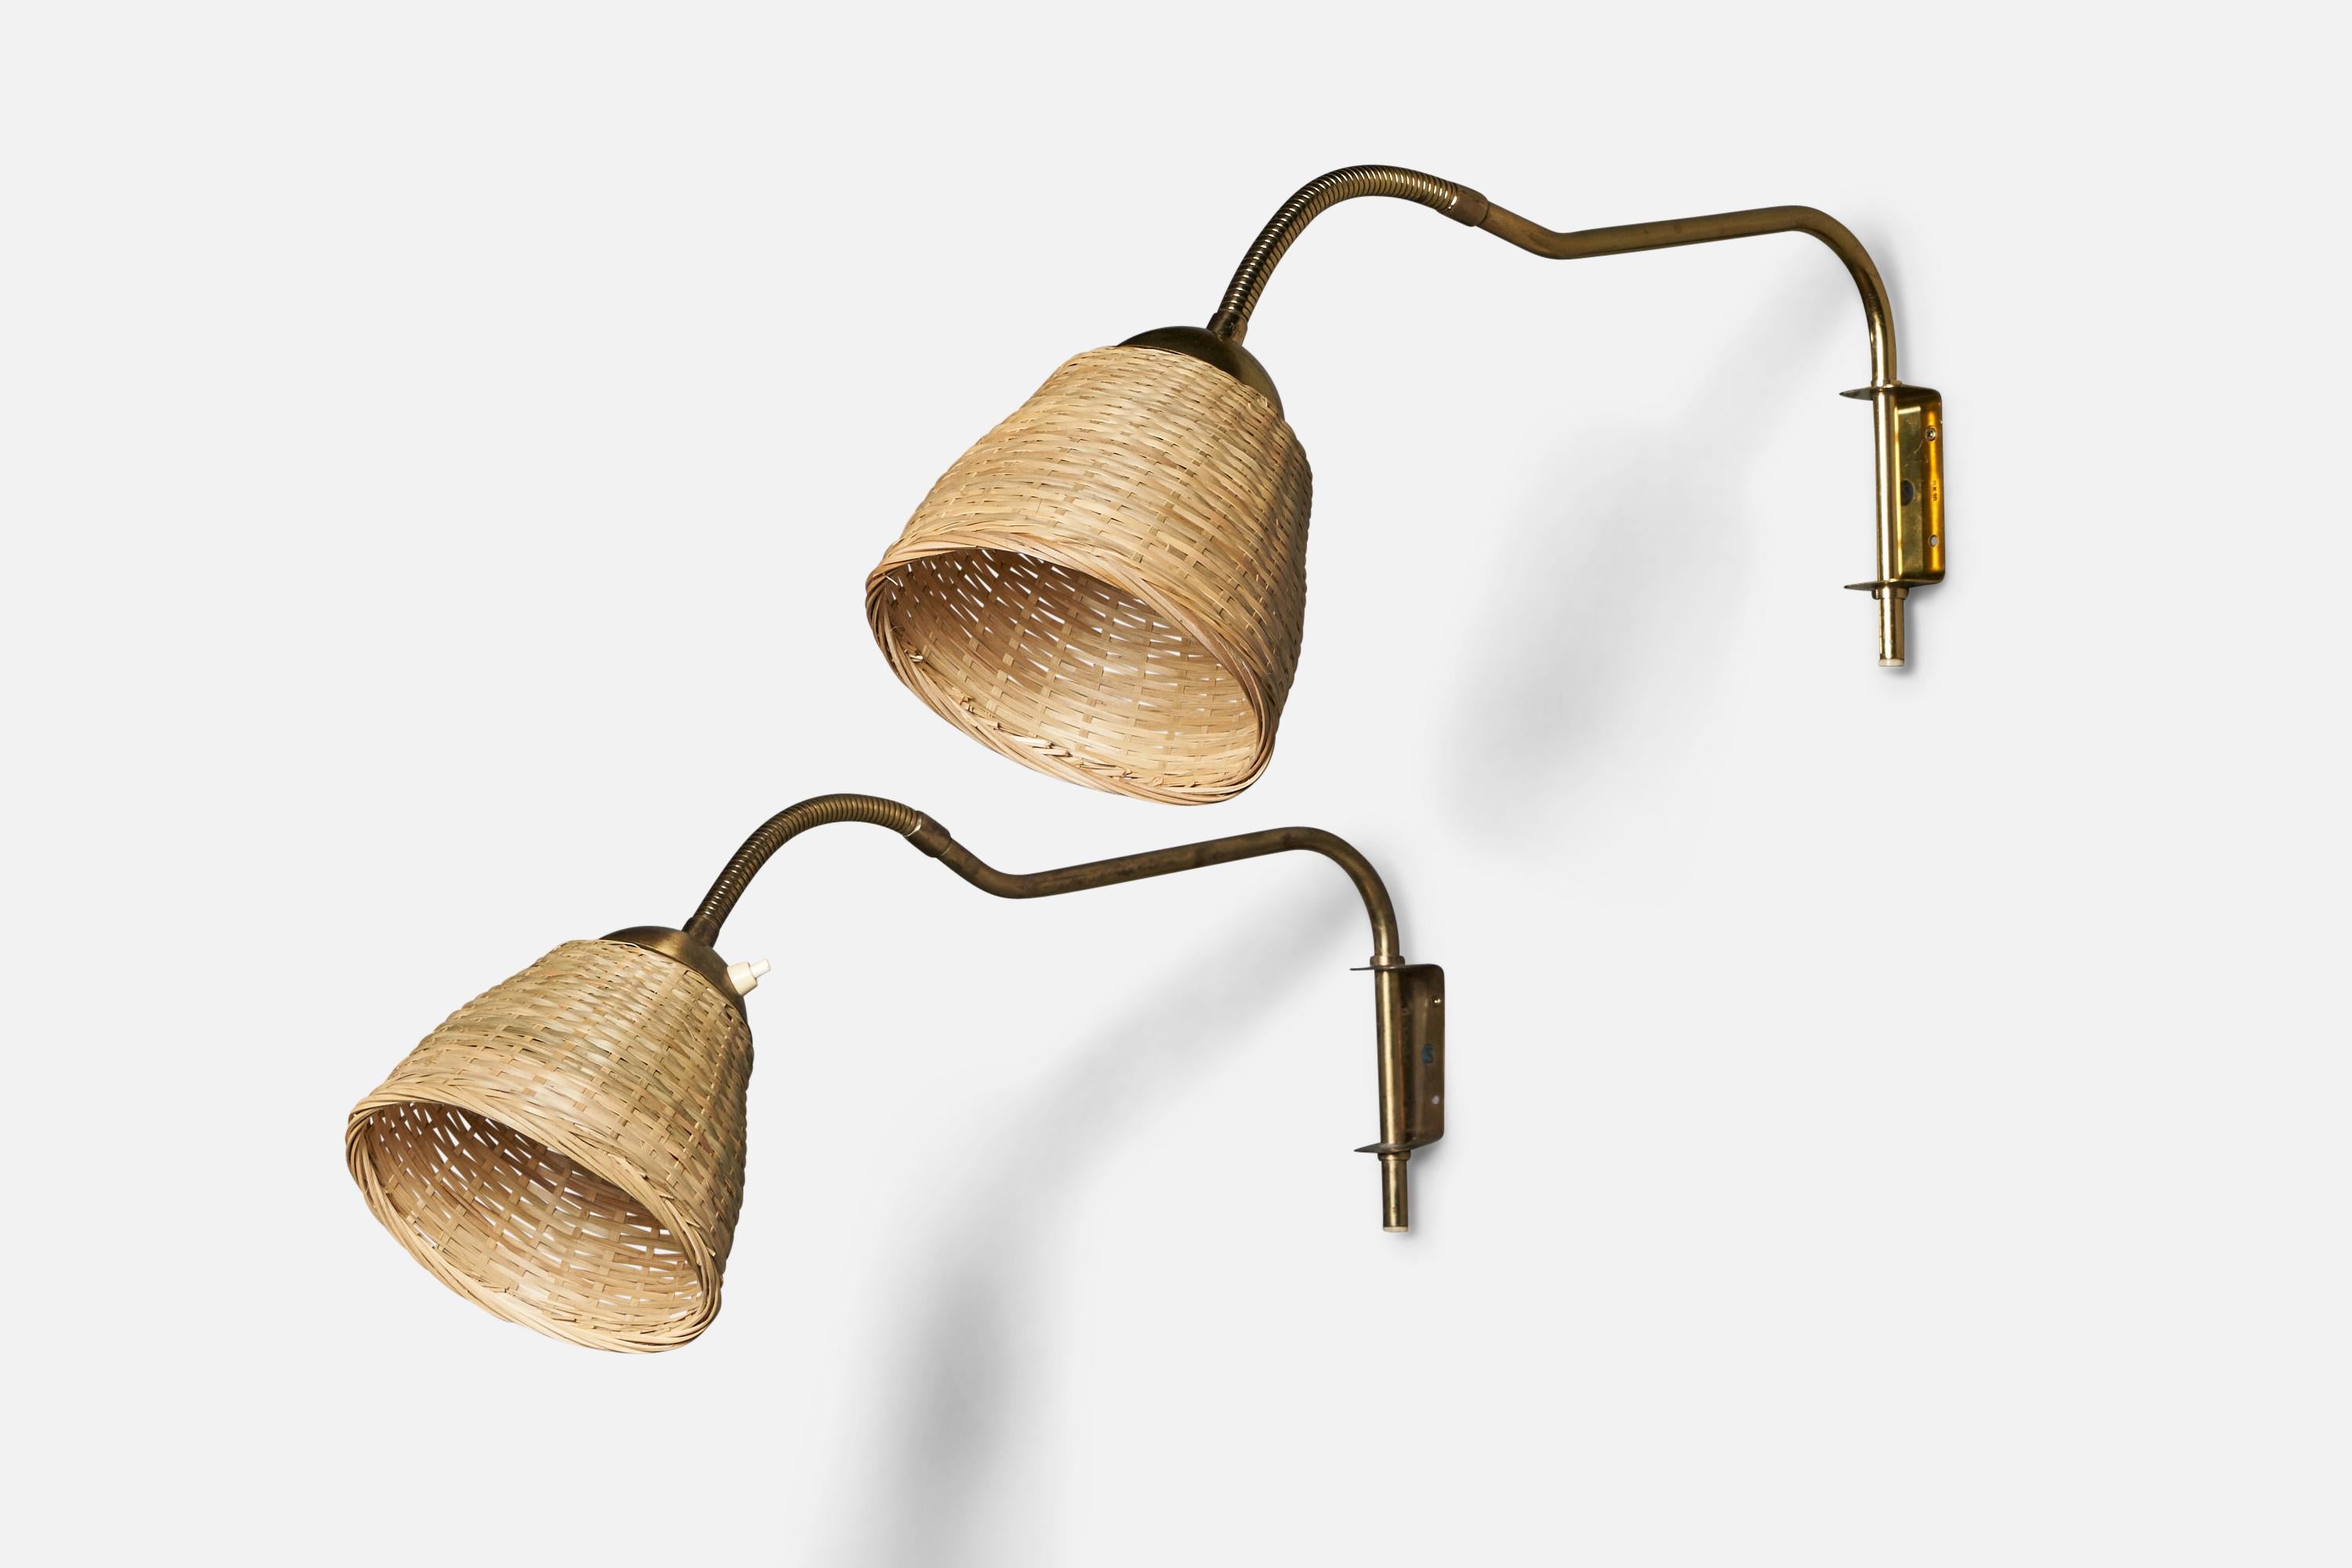 A pair of adjustable brass and rattan wall lights designed and produced in Sweden, 1940s.

Overall Dimensions (inches): 12.5” H x 7” W x 22” D
Back Plate Dimensions (inches): 3.6” H x 1.5” W x 1.5” D
Bulb Specifications: E-26 Bulb
Number of